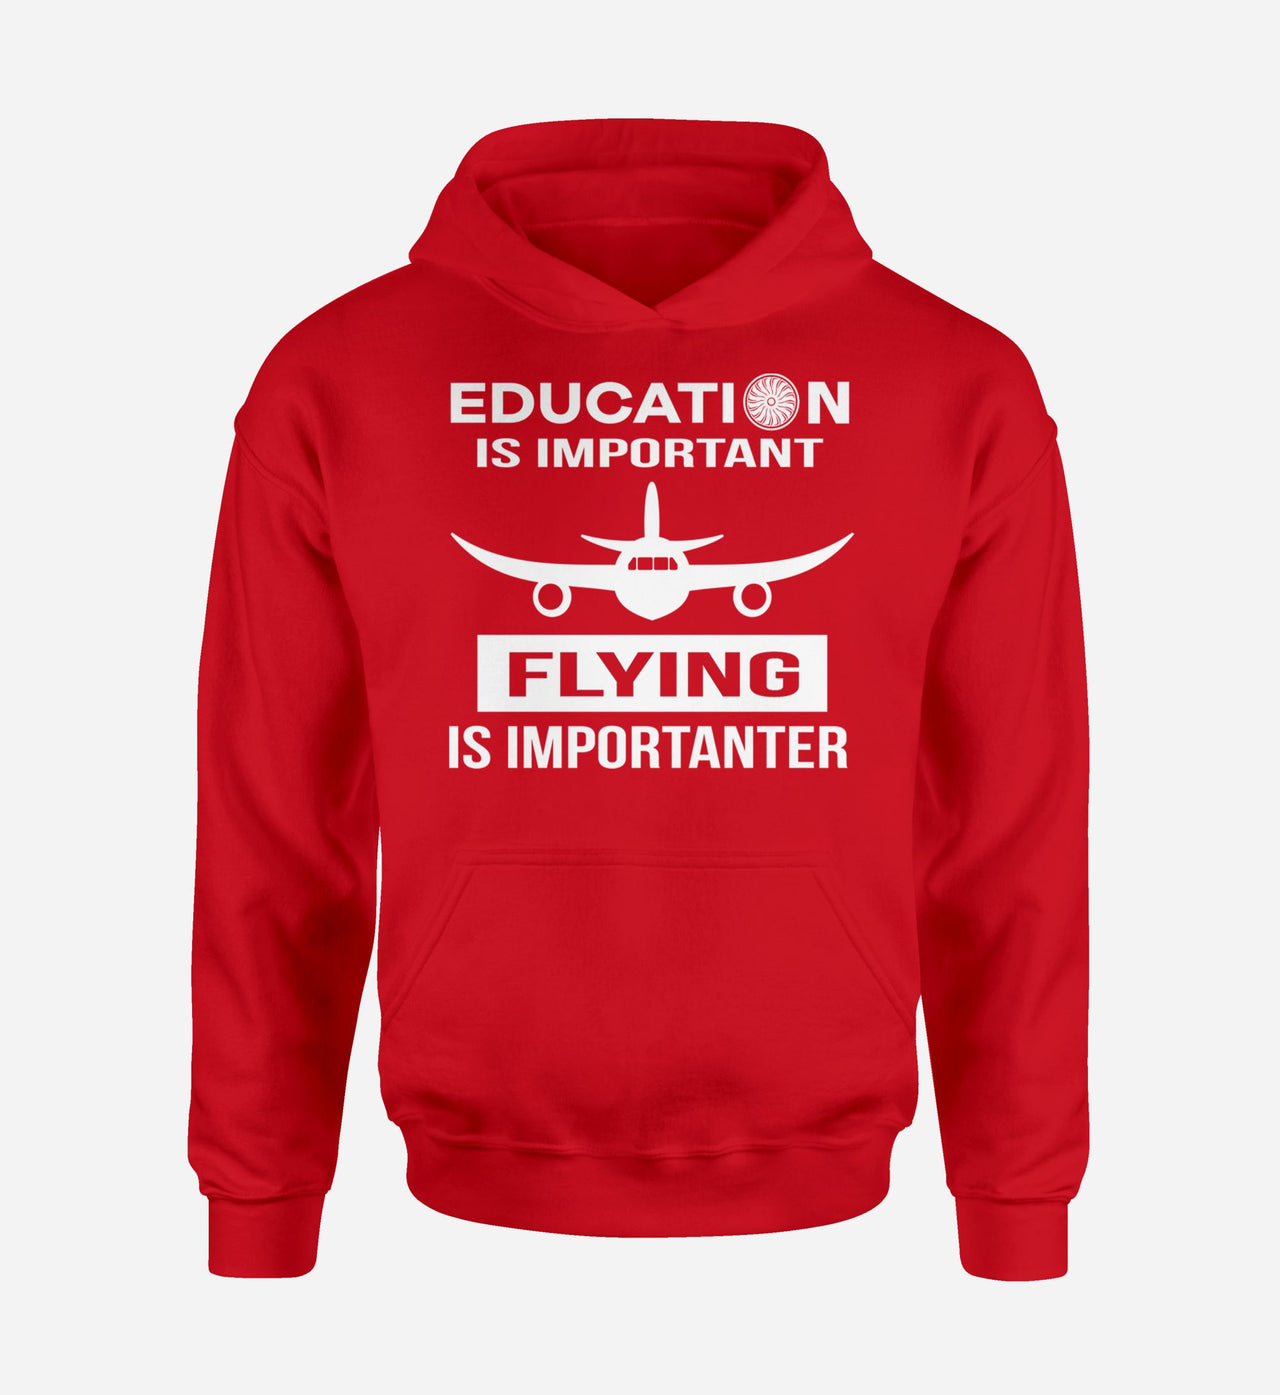 Flying is Importanter Designed Hoodies